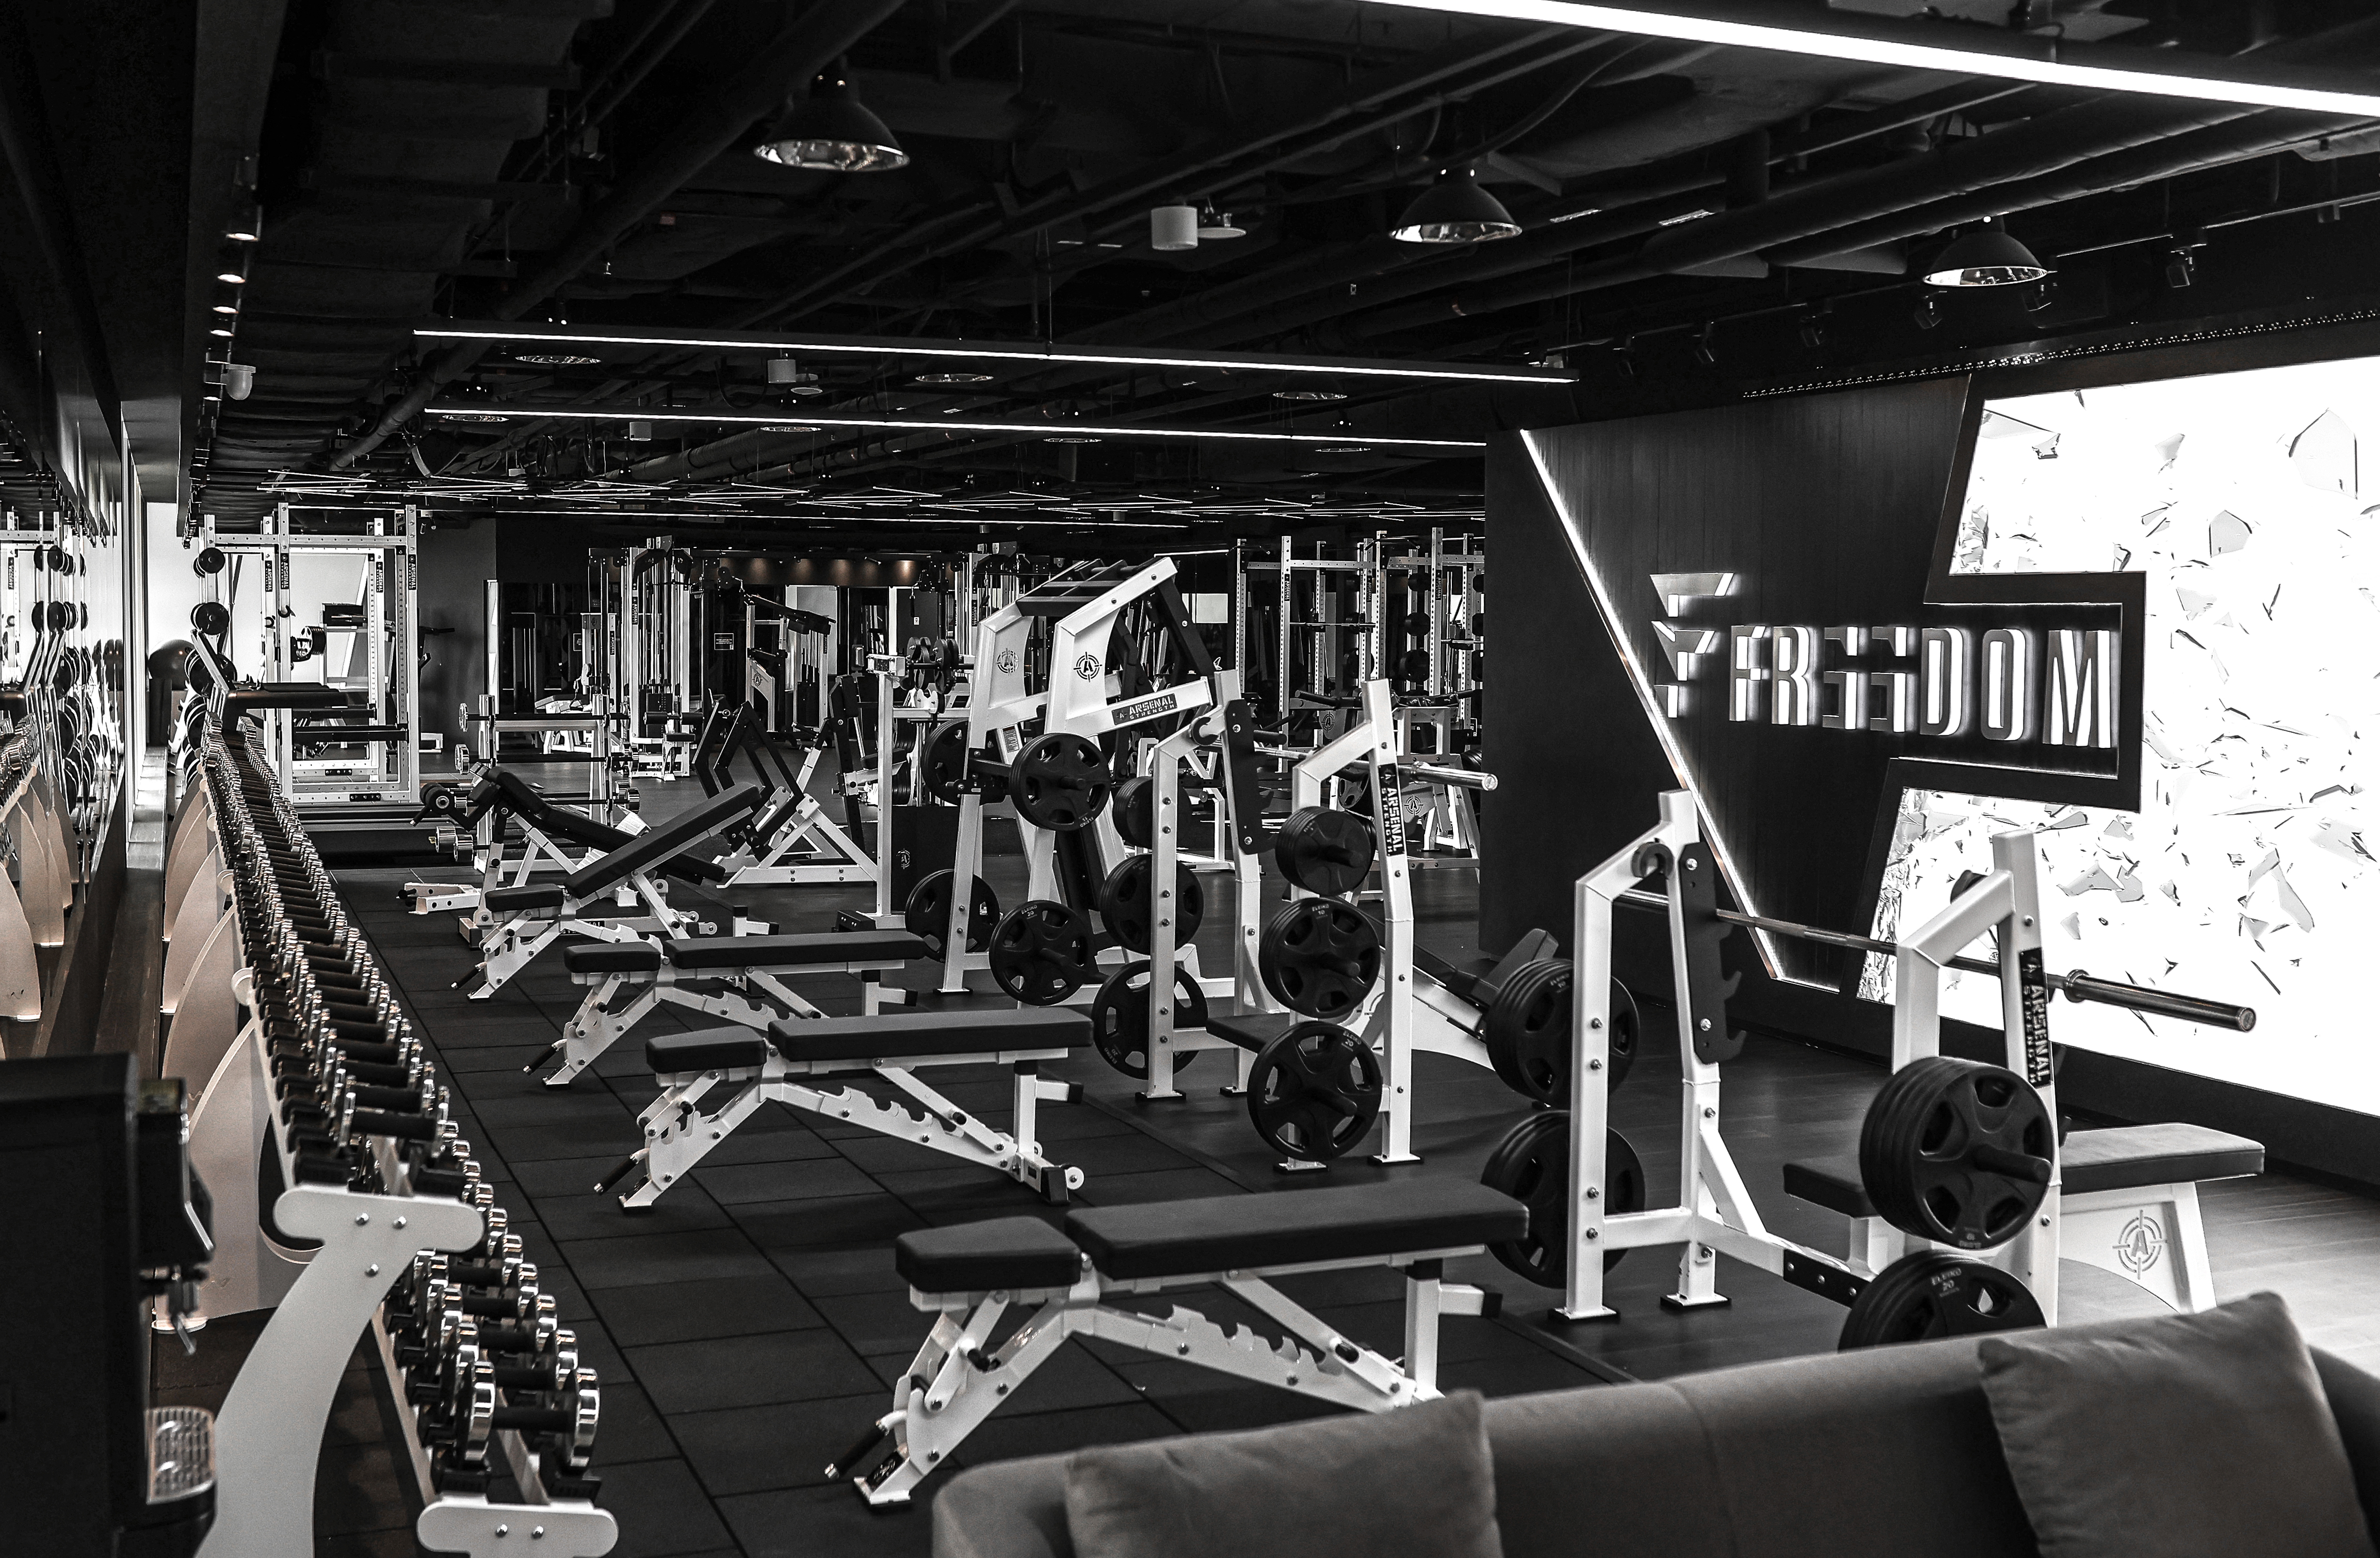 Possibly the best gym in the CBD – Freedom Gym Singapore